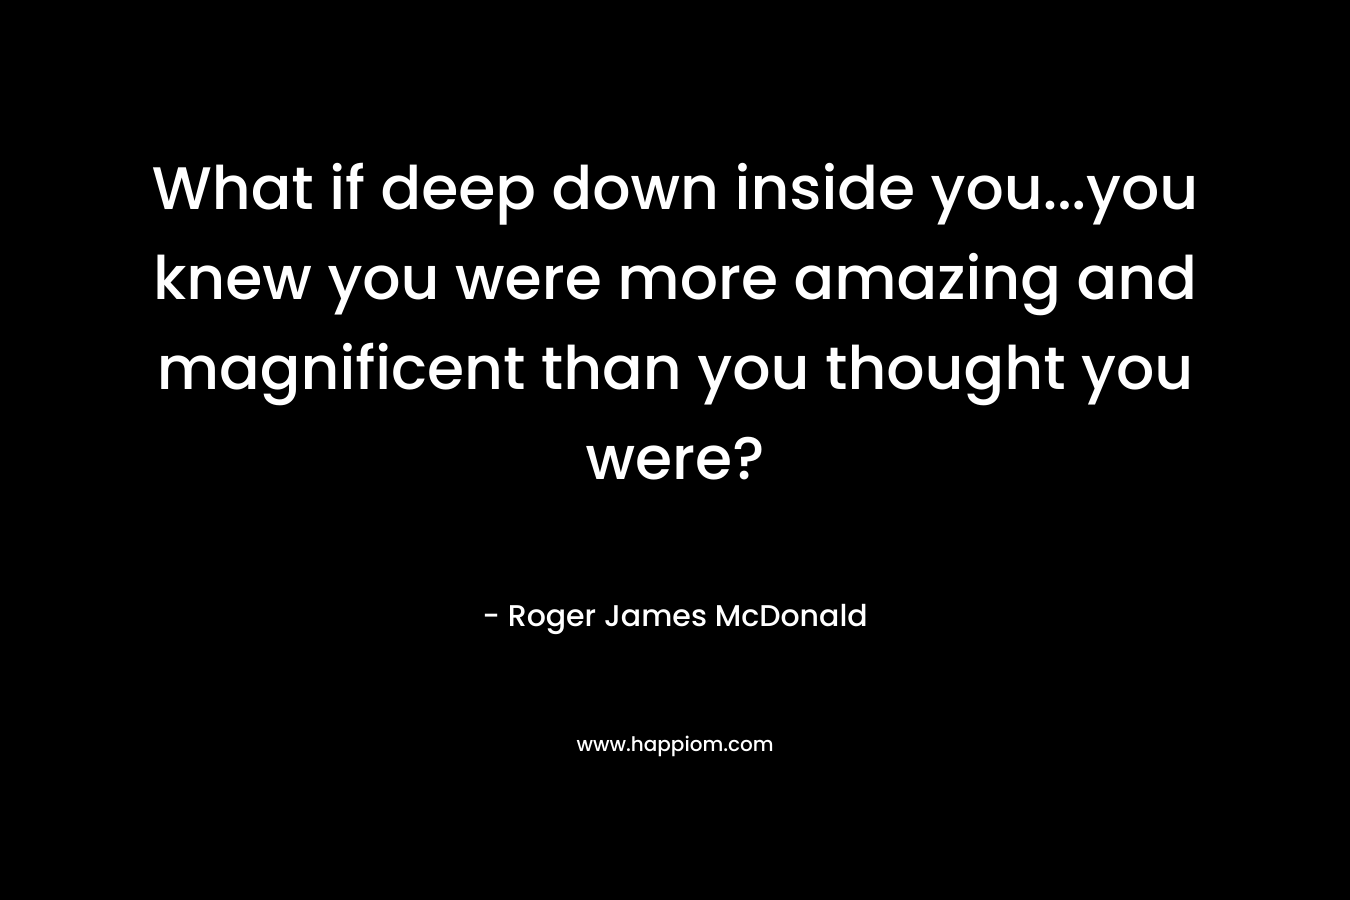 What if deep down inside you…you knew you were more amazing and magnificent than you thought you were? – Roger James McDonald